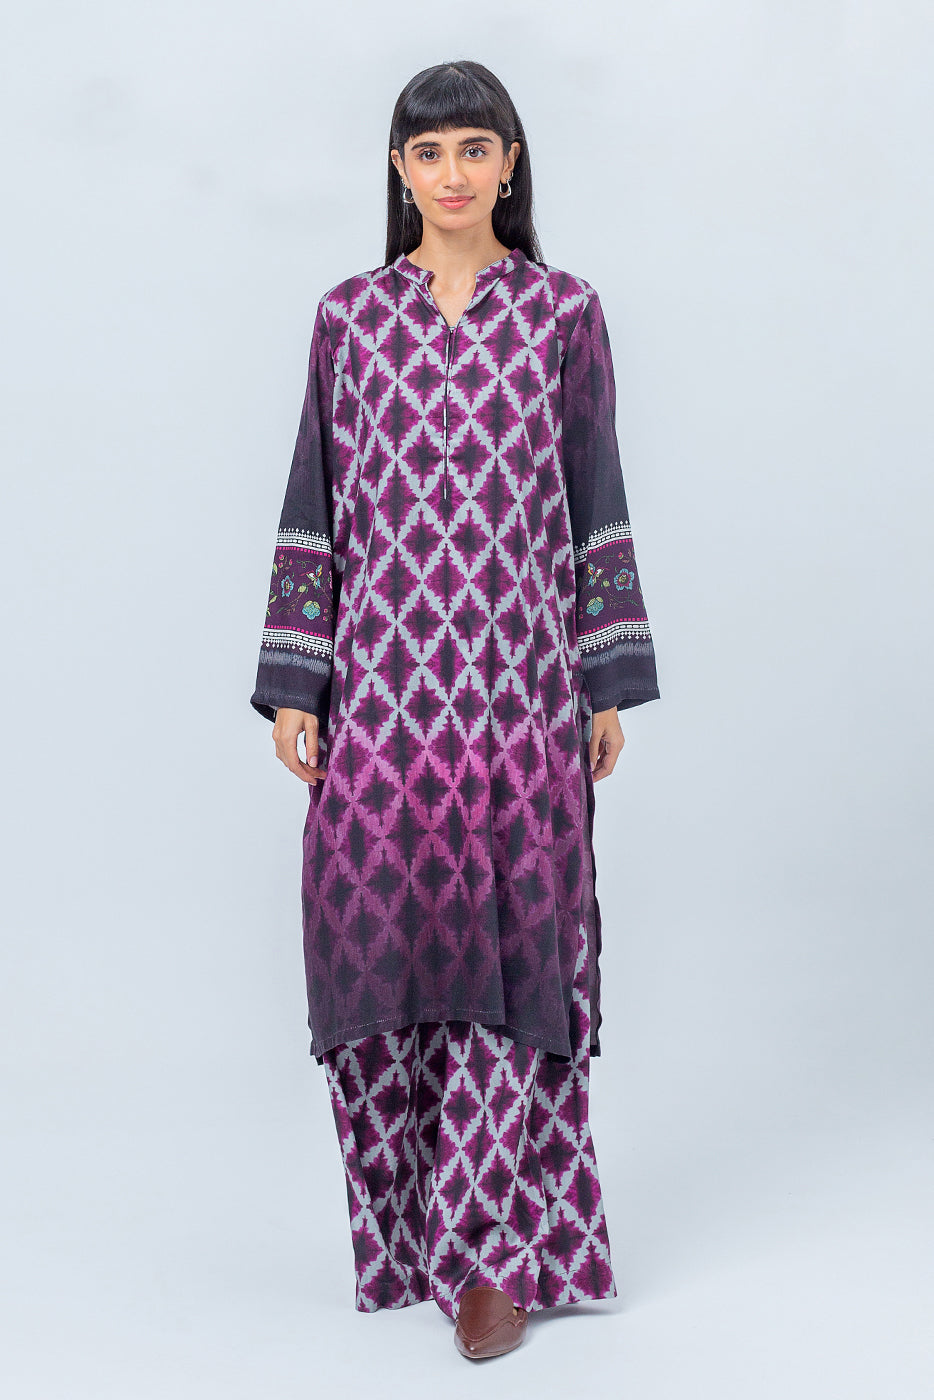 2 PIECE - PRINTED LINEN SUIT - BLOOMING DALES (UNSTITCHED) - BEECHTREE